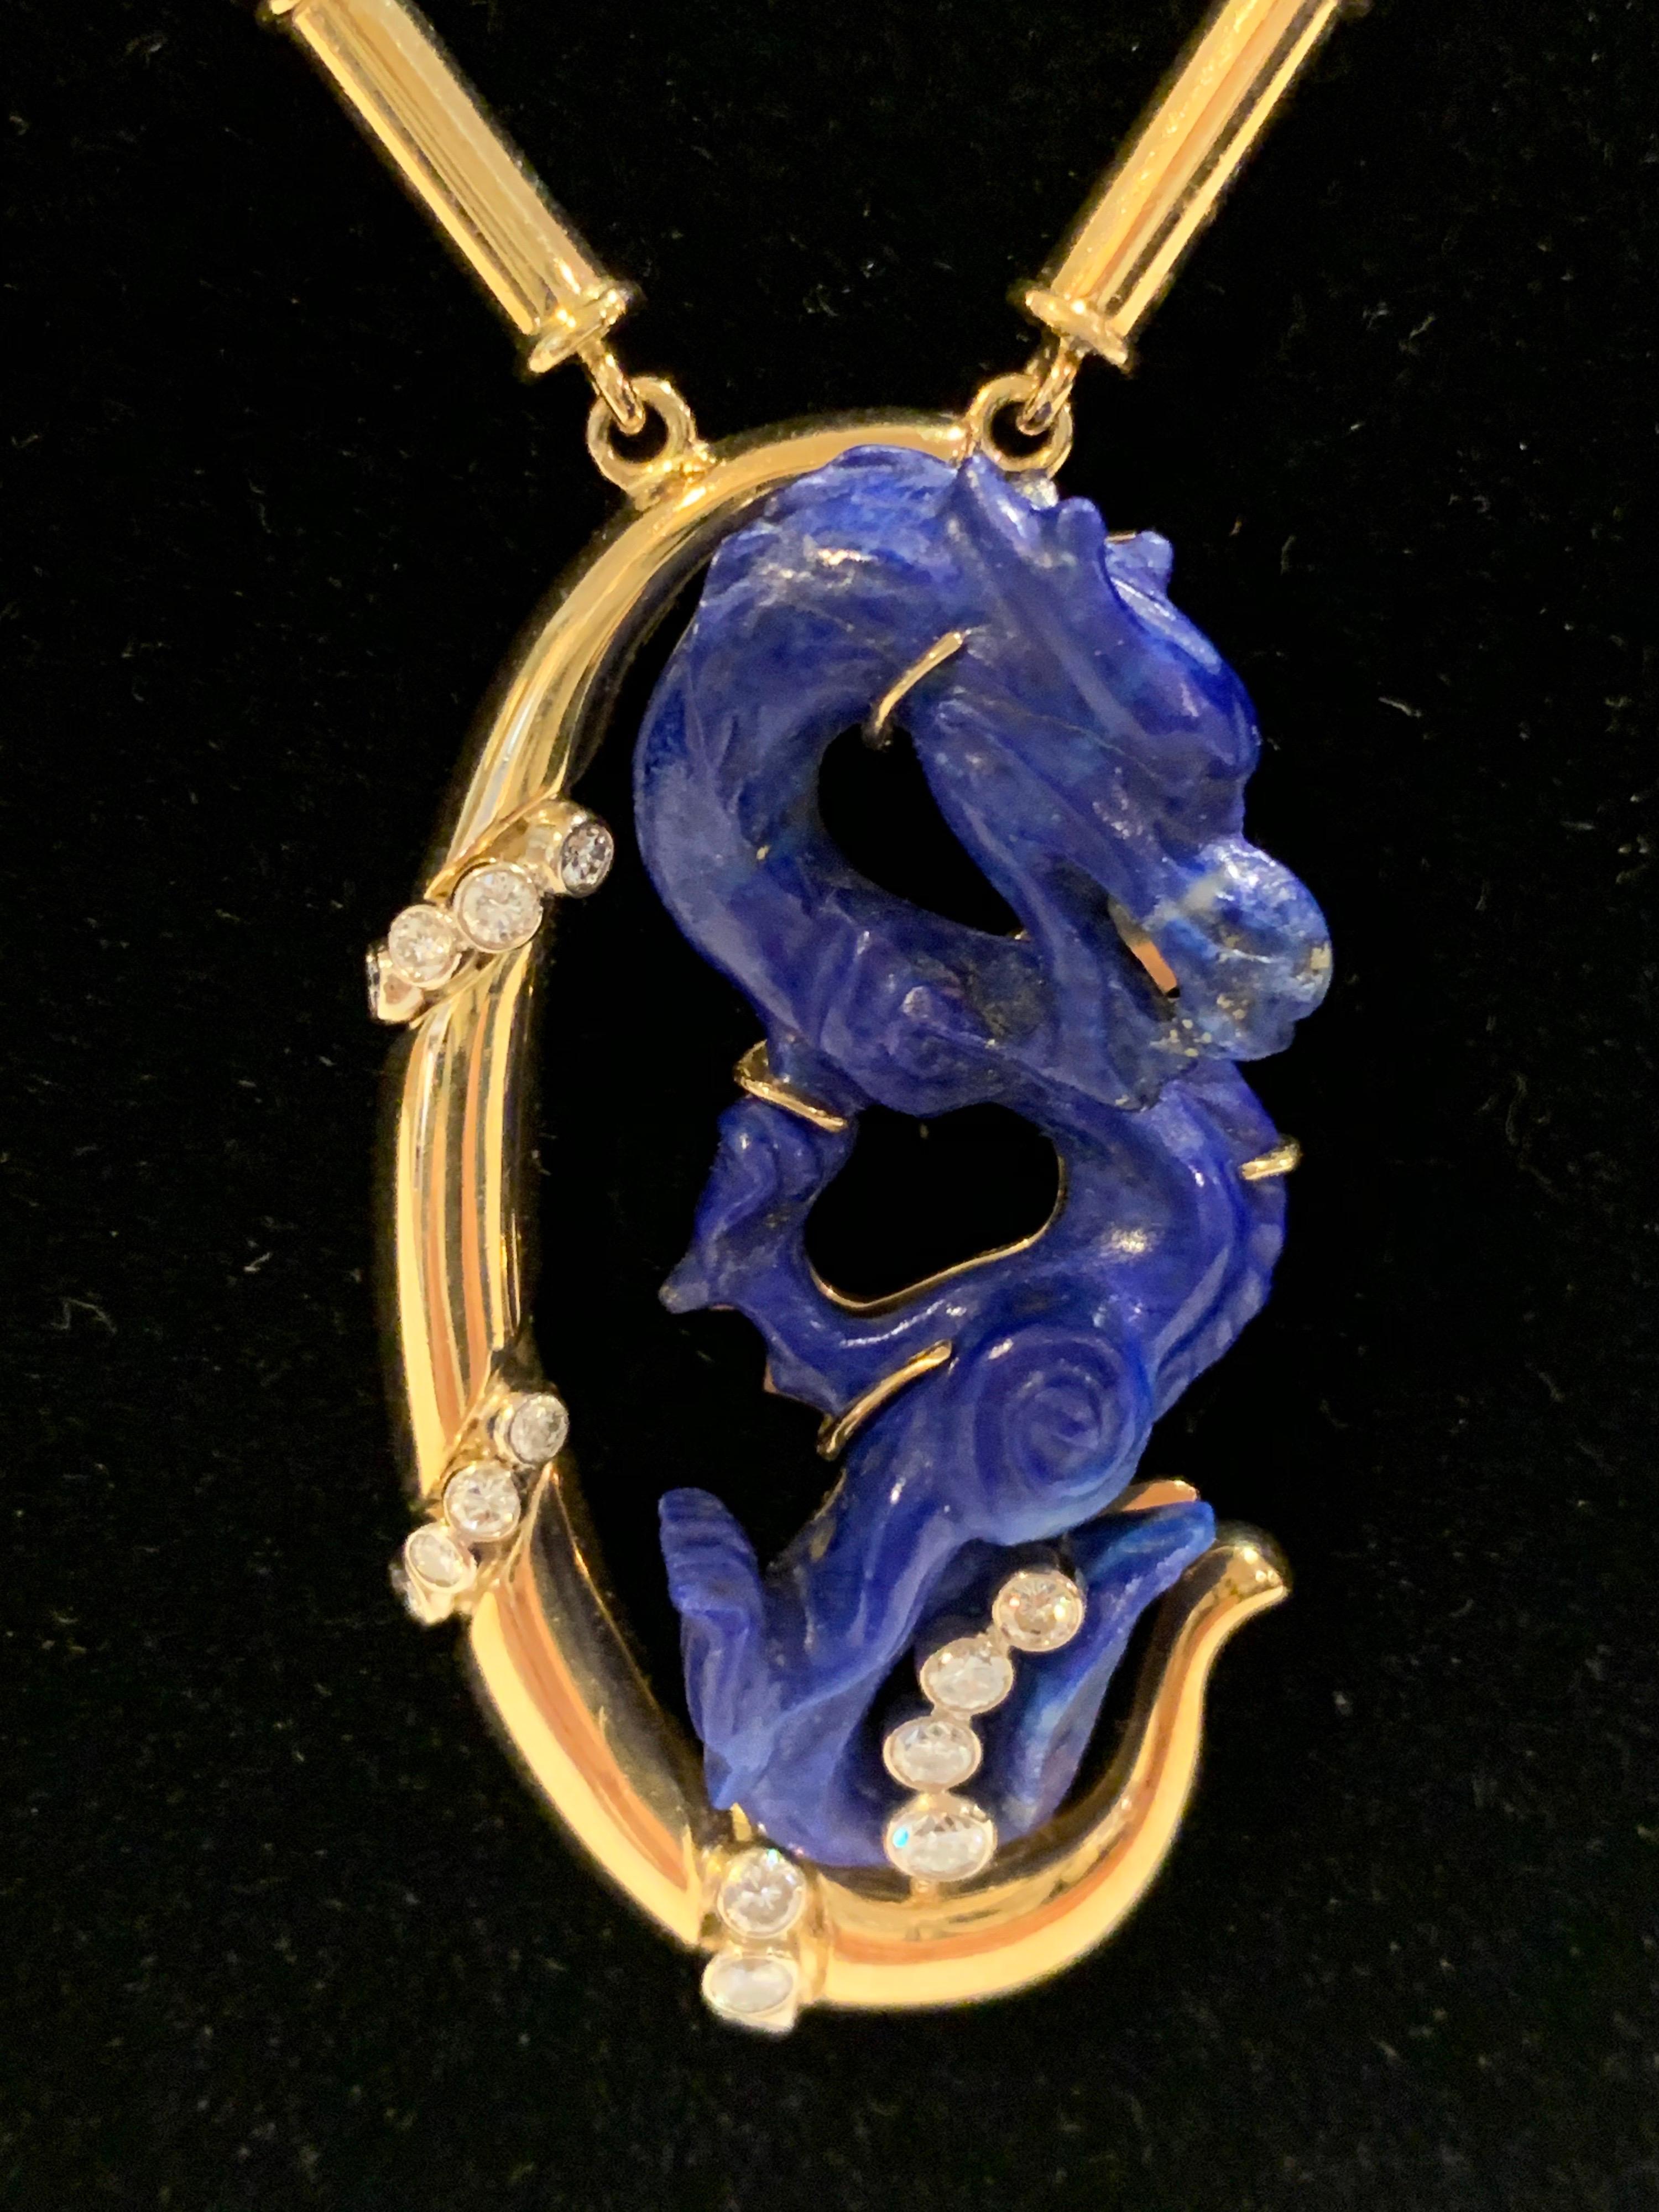 20th Century Carved Lapis Dragon in 18k Gold 28.6 Dwt Handcrafted Diamond Pendant and chain